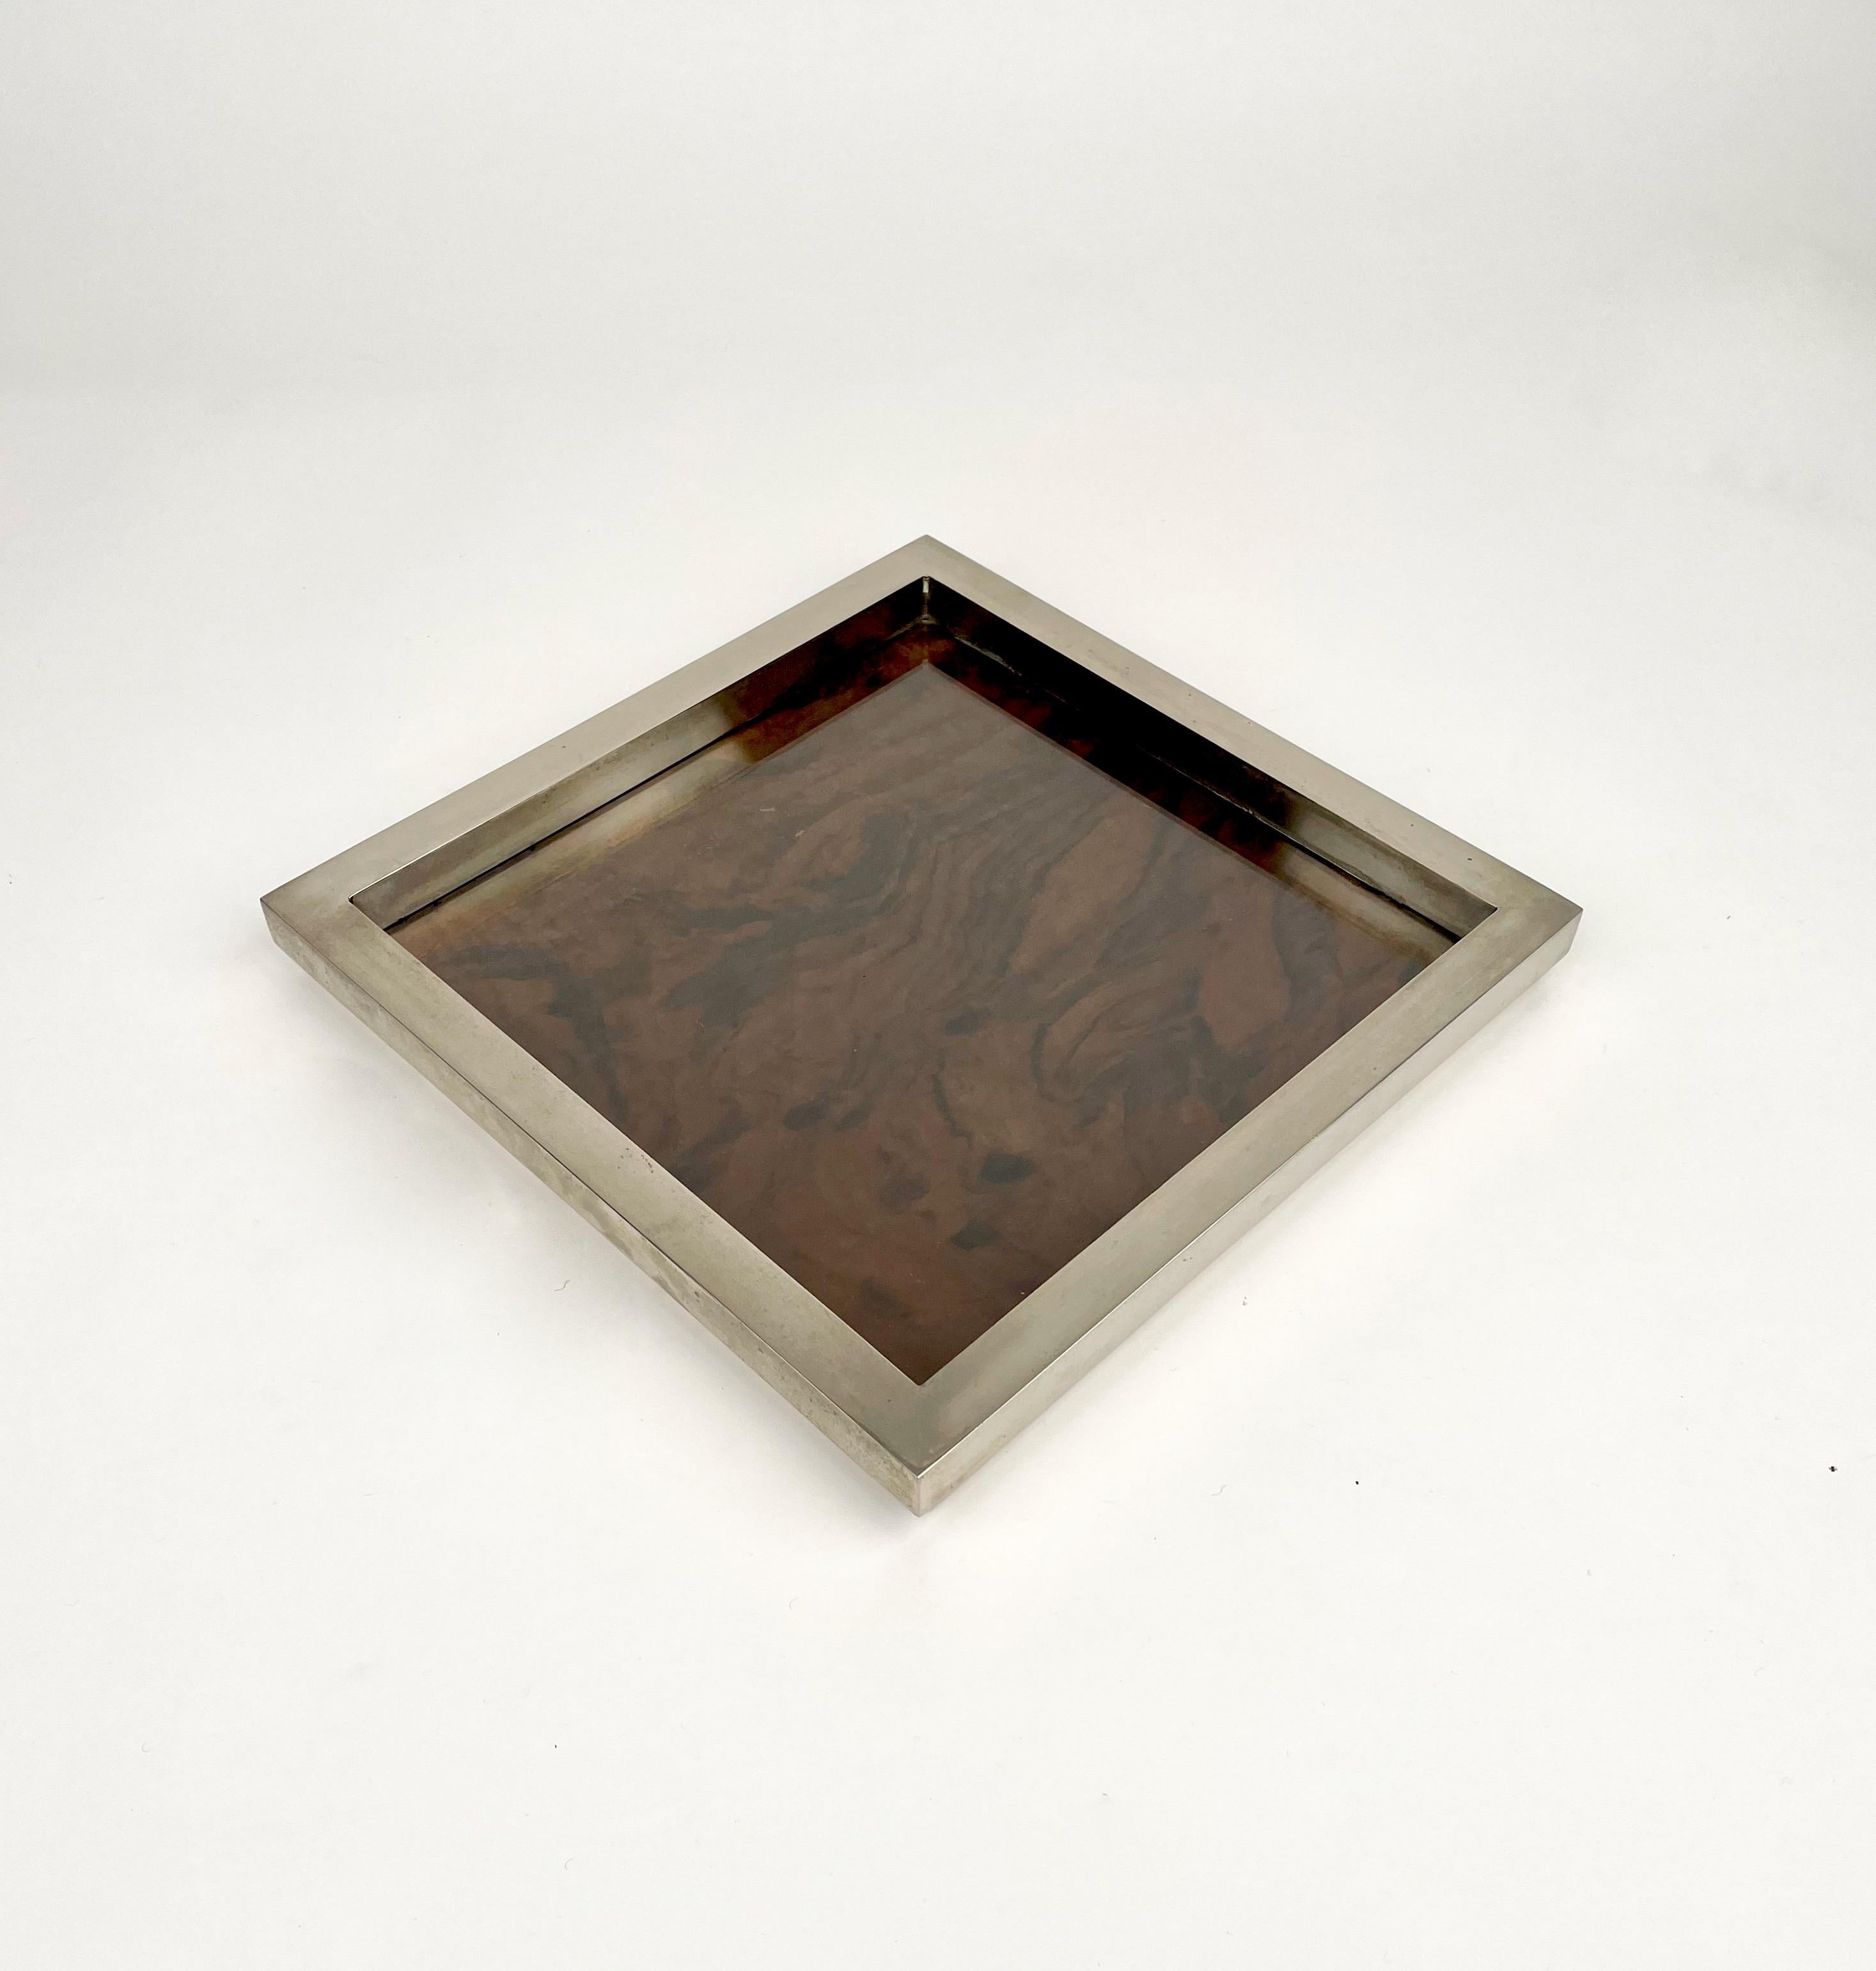 Italian Chrome, Wood and Glass Squared Pocket Emptier Centerpiece, Italy, 1970s For Sale